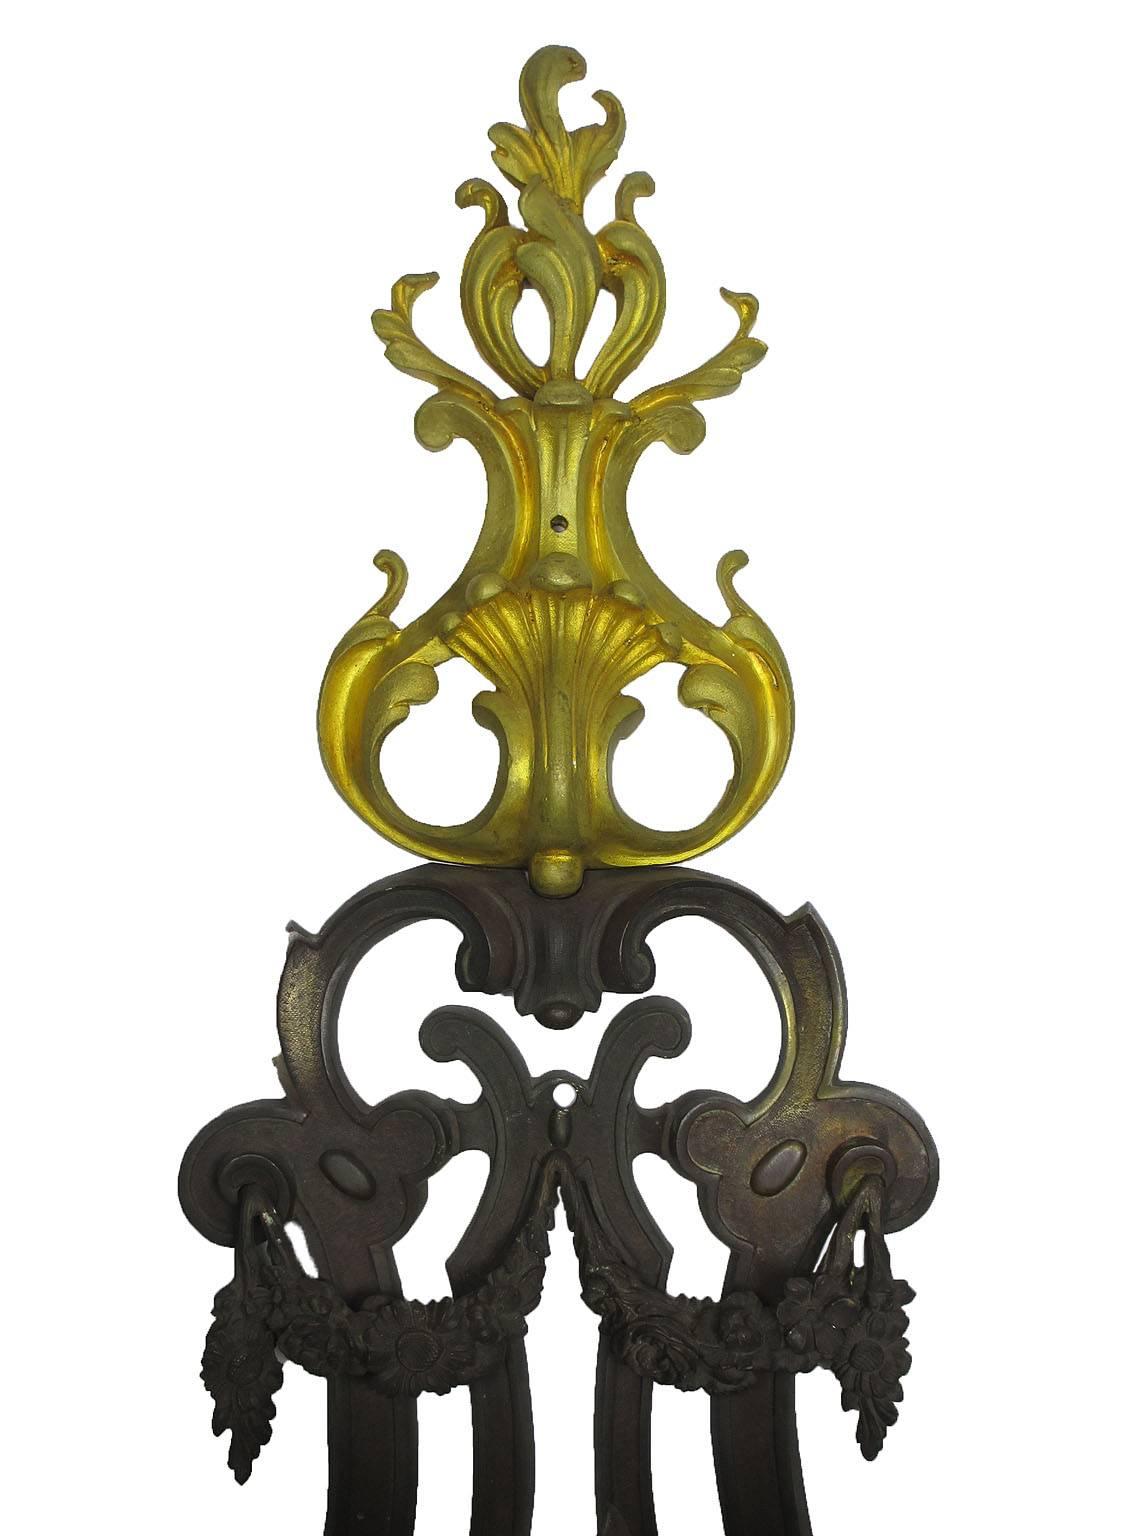 A fine and Large French Art Deco patinated and gilt bronze seven-light figural wall sconce, the impressive harp-shaped frame with the light-arms in the form of lilies, crowned with a gilt-bronze scrolled acanthus finial and a satyr mask at the